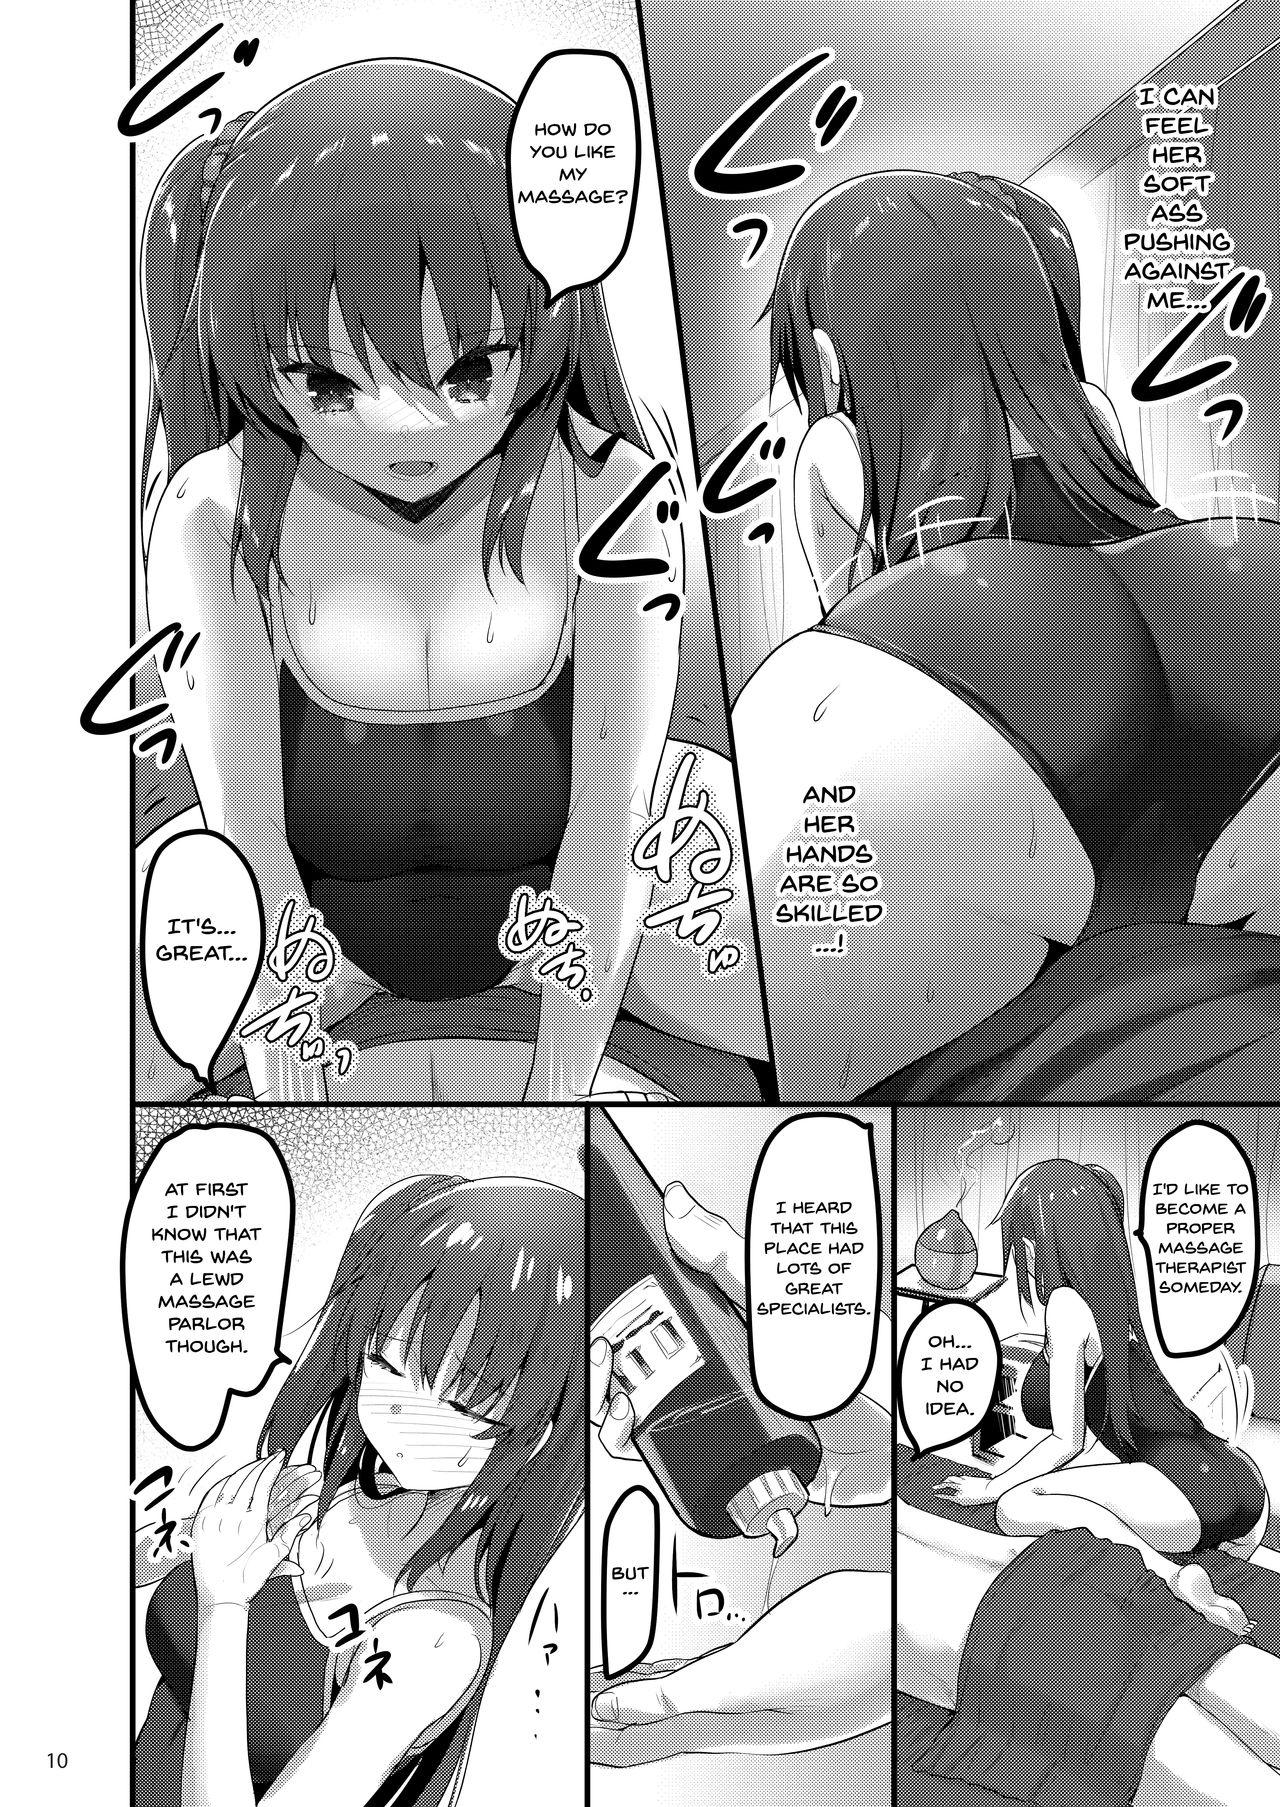 Femdom Ecchi na Massage-ya ni Kitara Classmate ga Dete Kita Hanashi | A Story Of Going Out To Get a Massage And The One Who Shows Up Is My Classmate - Original Masterbate - Page 9